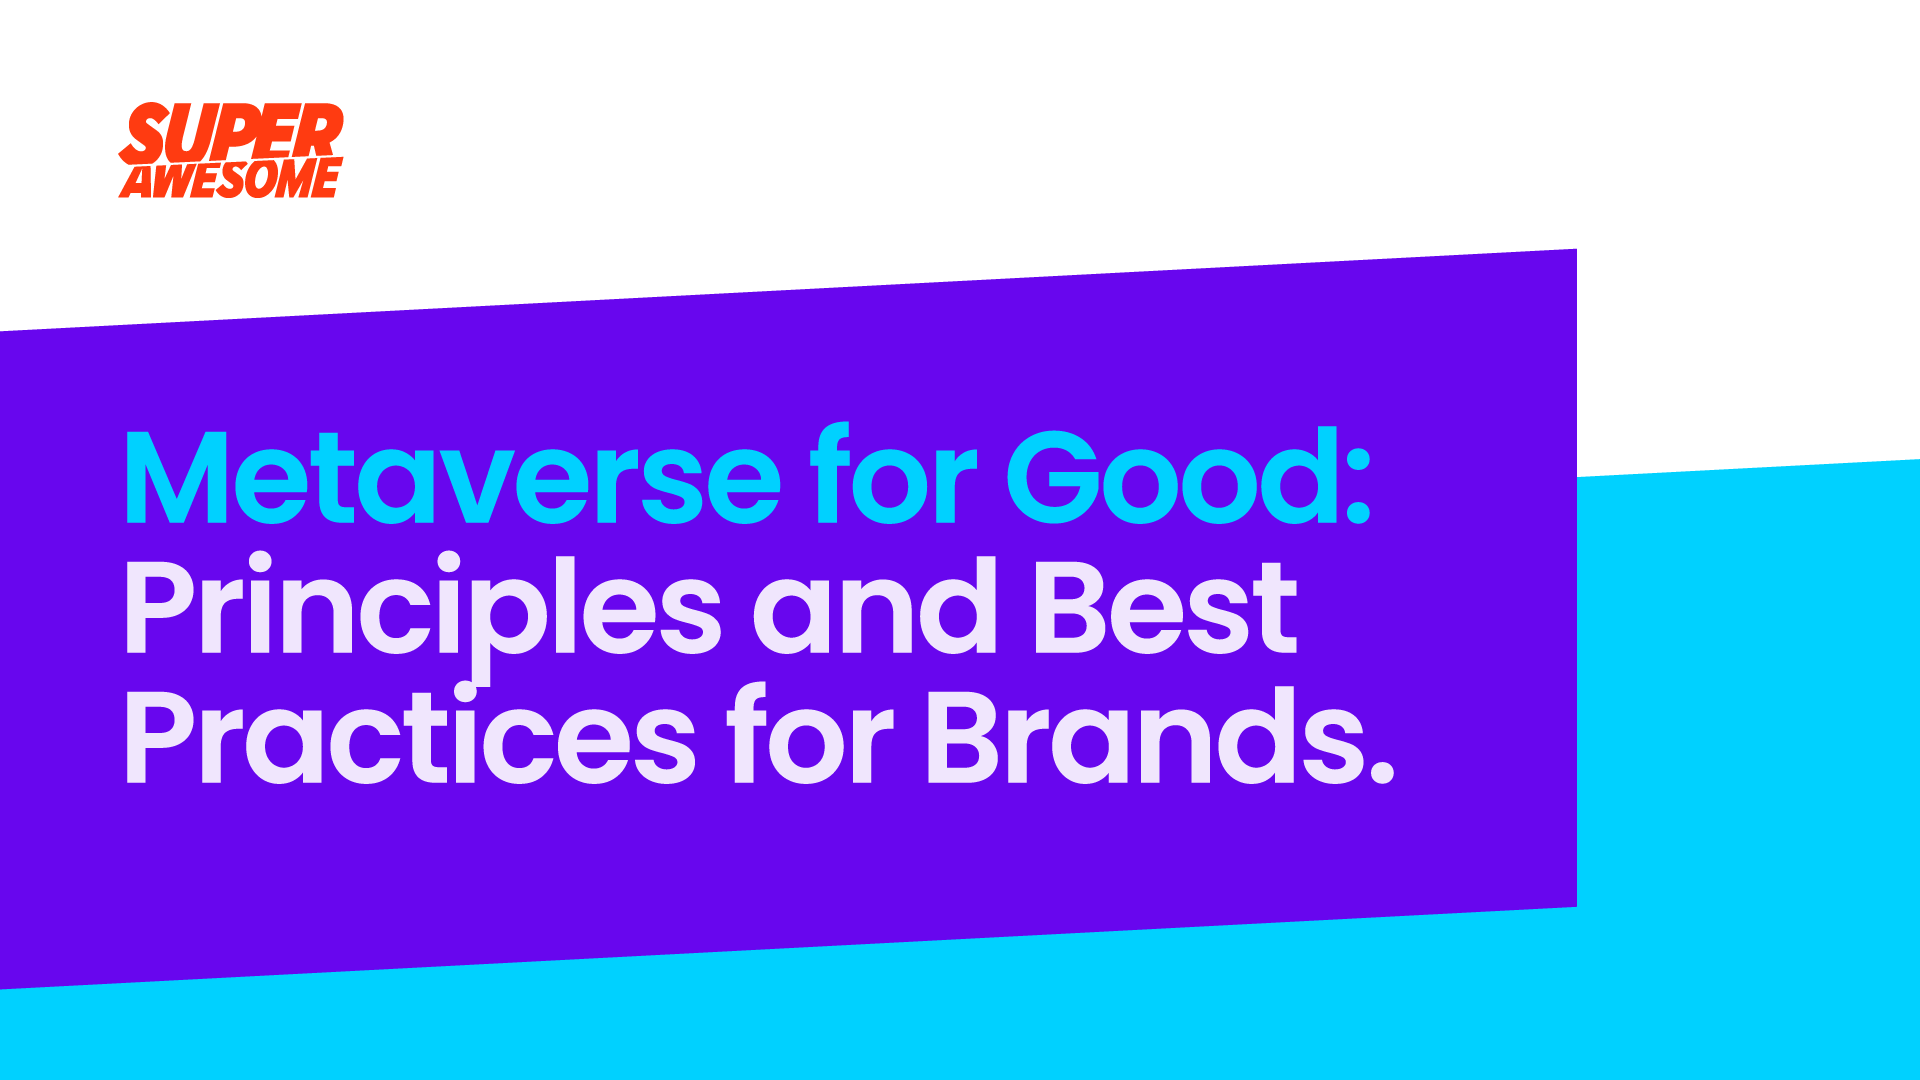 Metaverse for Good: Principles and Best Practices for Brands